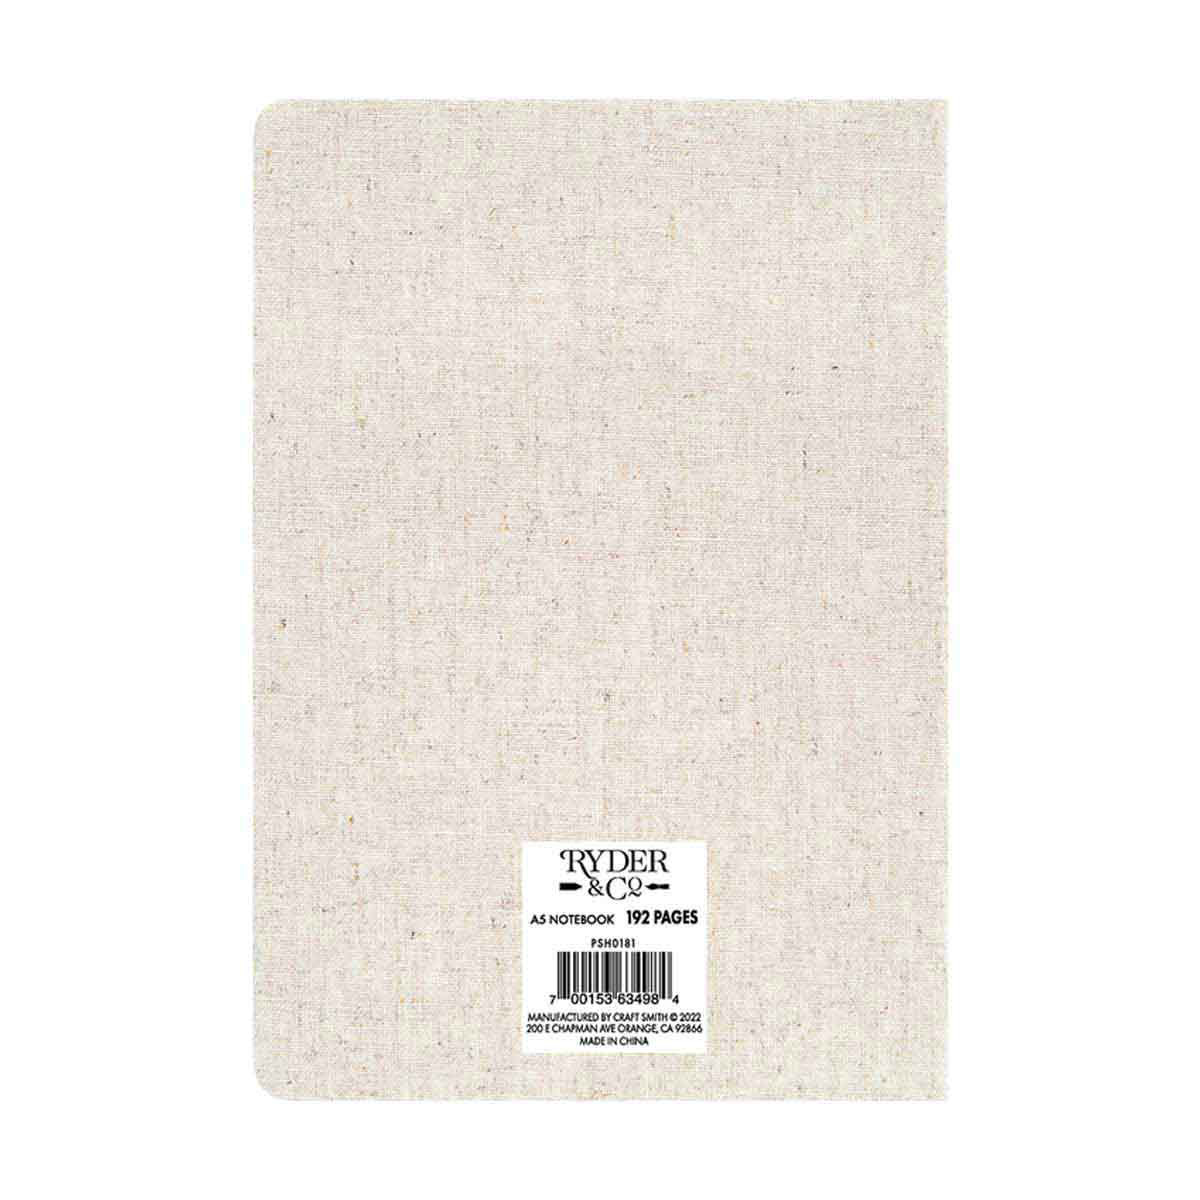 Ryder & Co. Natural Linen Notebook, 192 Pages